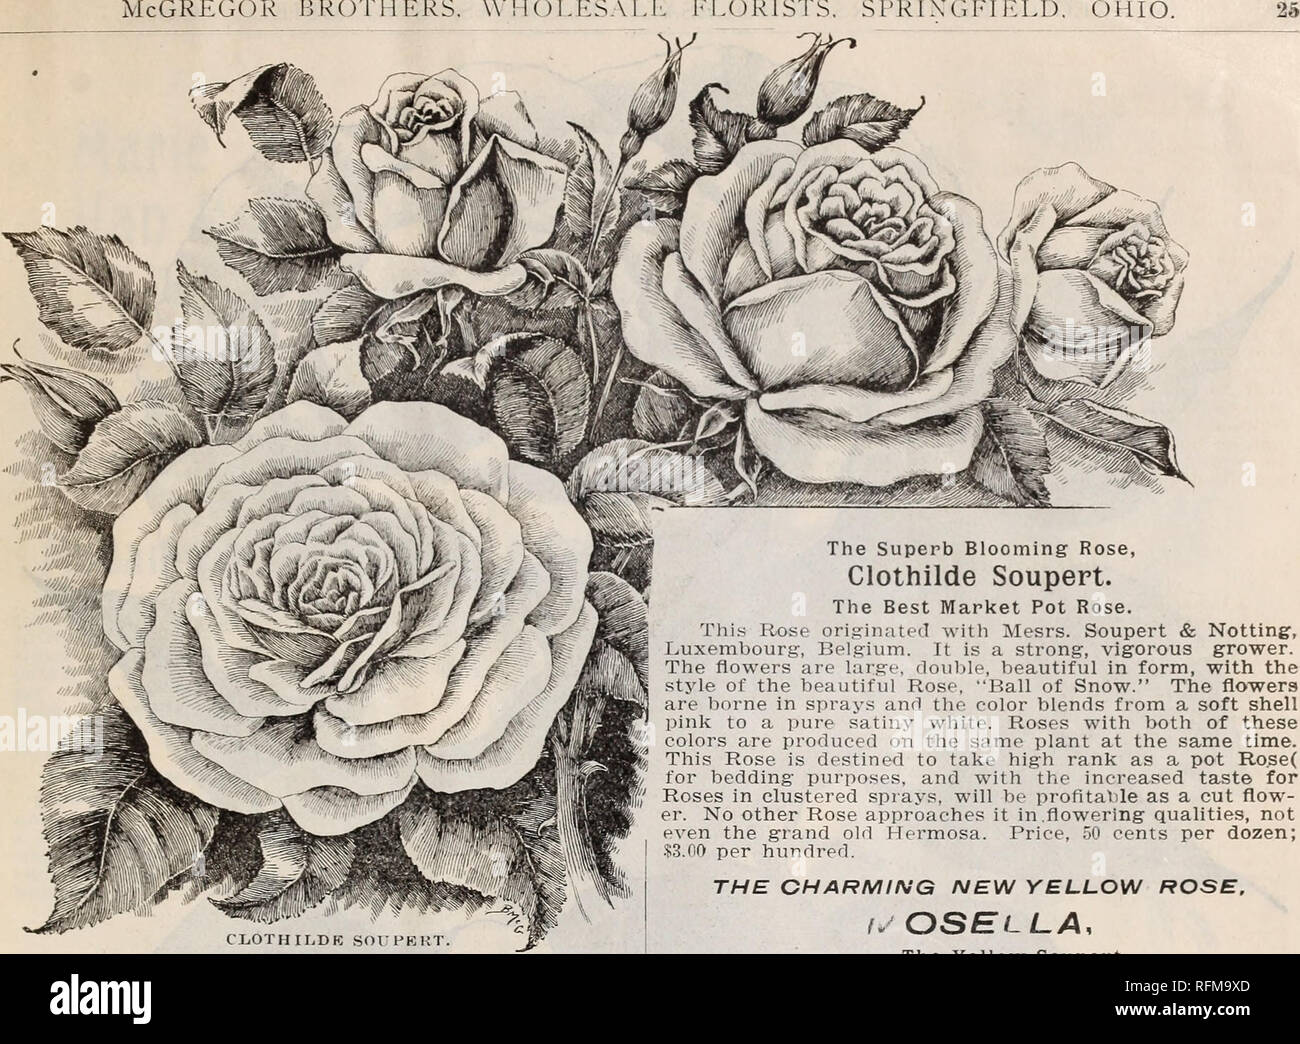 . McGregor Brothers' wholesale price list of plants for florists for spring, 1899. Nurseries (Horticulture) Ohio Springfield Catalogs; Plants, Ornamental Catalogs; Flowers Catalogs; Bulbs (Plants) Catalogs. / McGregor brothers. CLOTHILDRSOUPERT The Beautiful Pink Soupert. This bright new Rose is a very free flowering much resembling- Hermosa, but more double and more freely; it shows the Polyantha blood in cluster of bloom, and it will make a har.dsome bedded or grown with the C. Soupert. The flower quite so large, full and handsome as our original but fill a place because of their brightness  Stock Photo